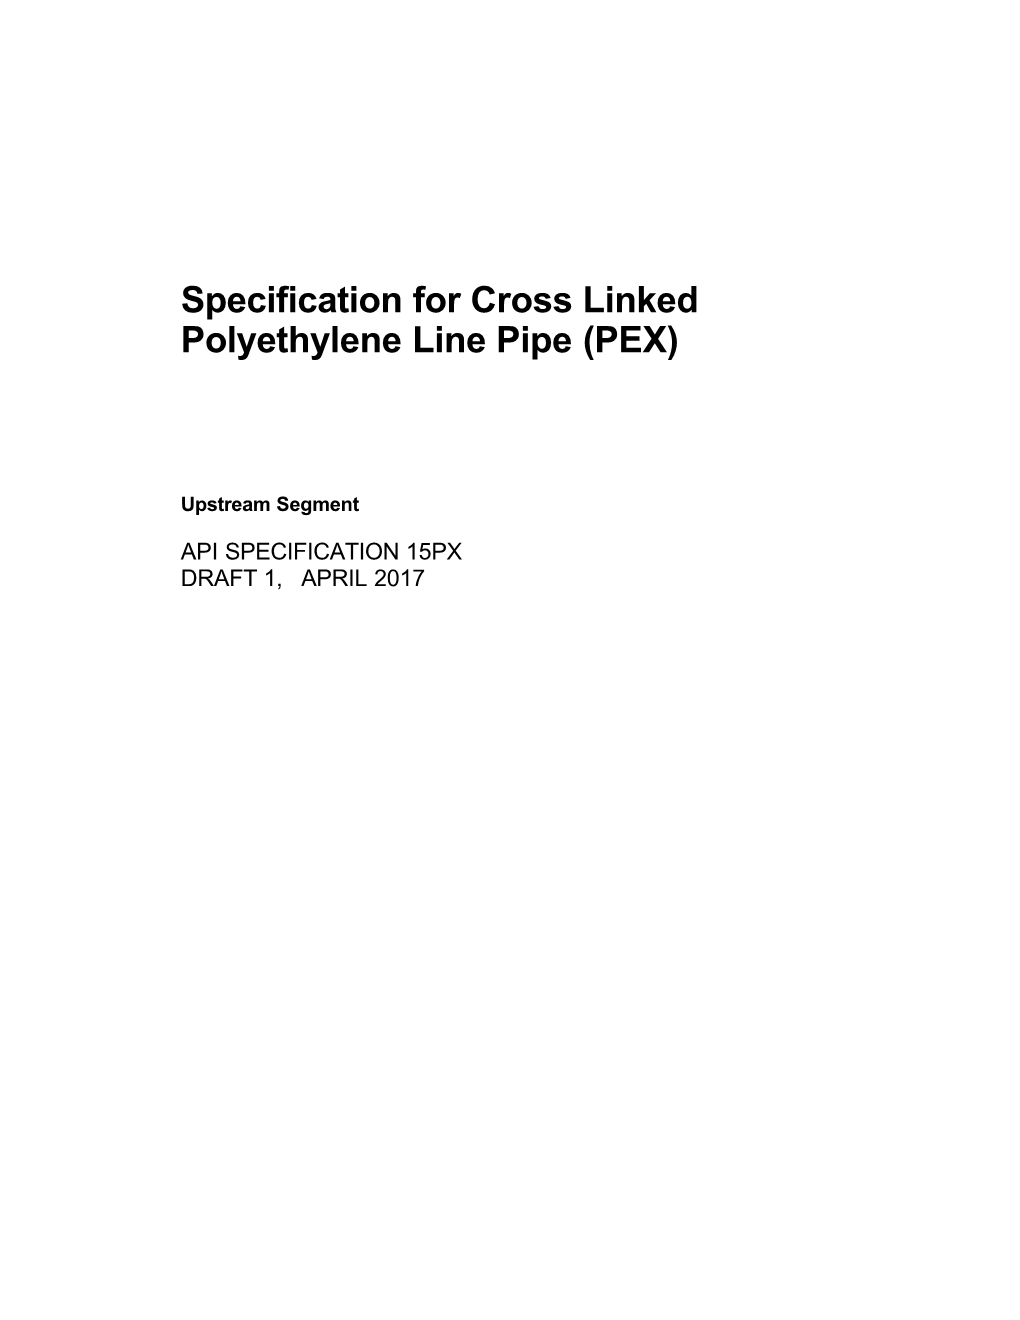 Specification for Cross Linked Polyethylene Line Pipe(PEX)